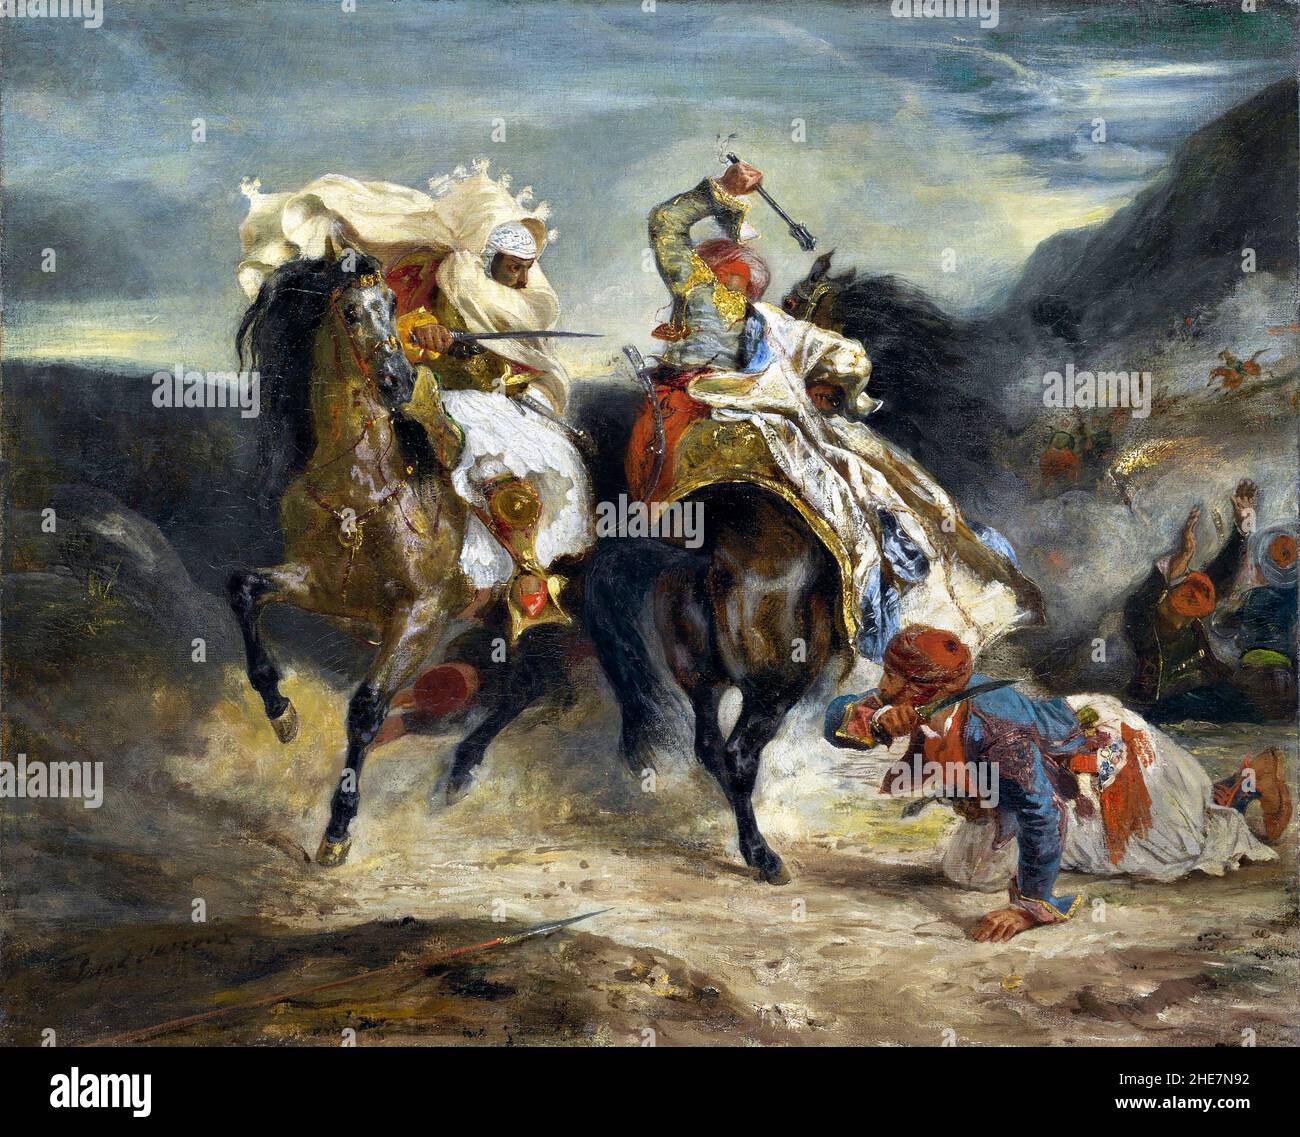 The Combat of the Giaour and Hassan by Eugène Delacroix (1798-1863), 1826 Stock Photo